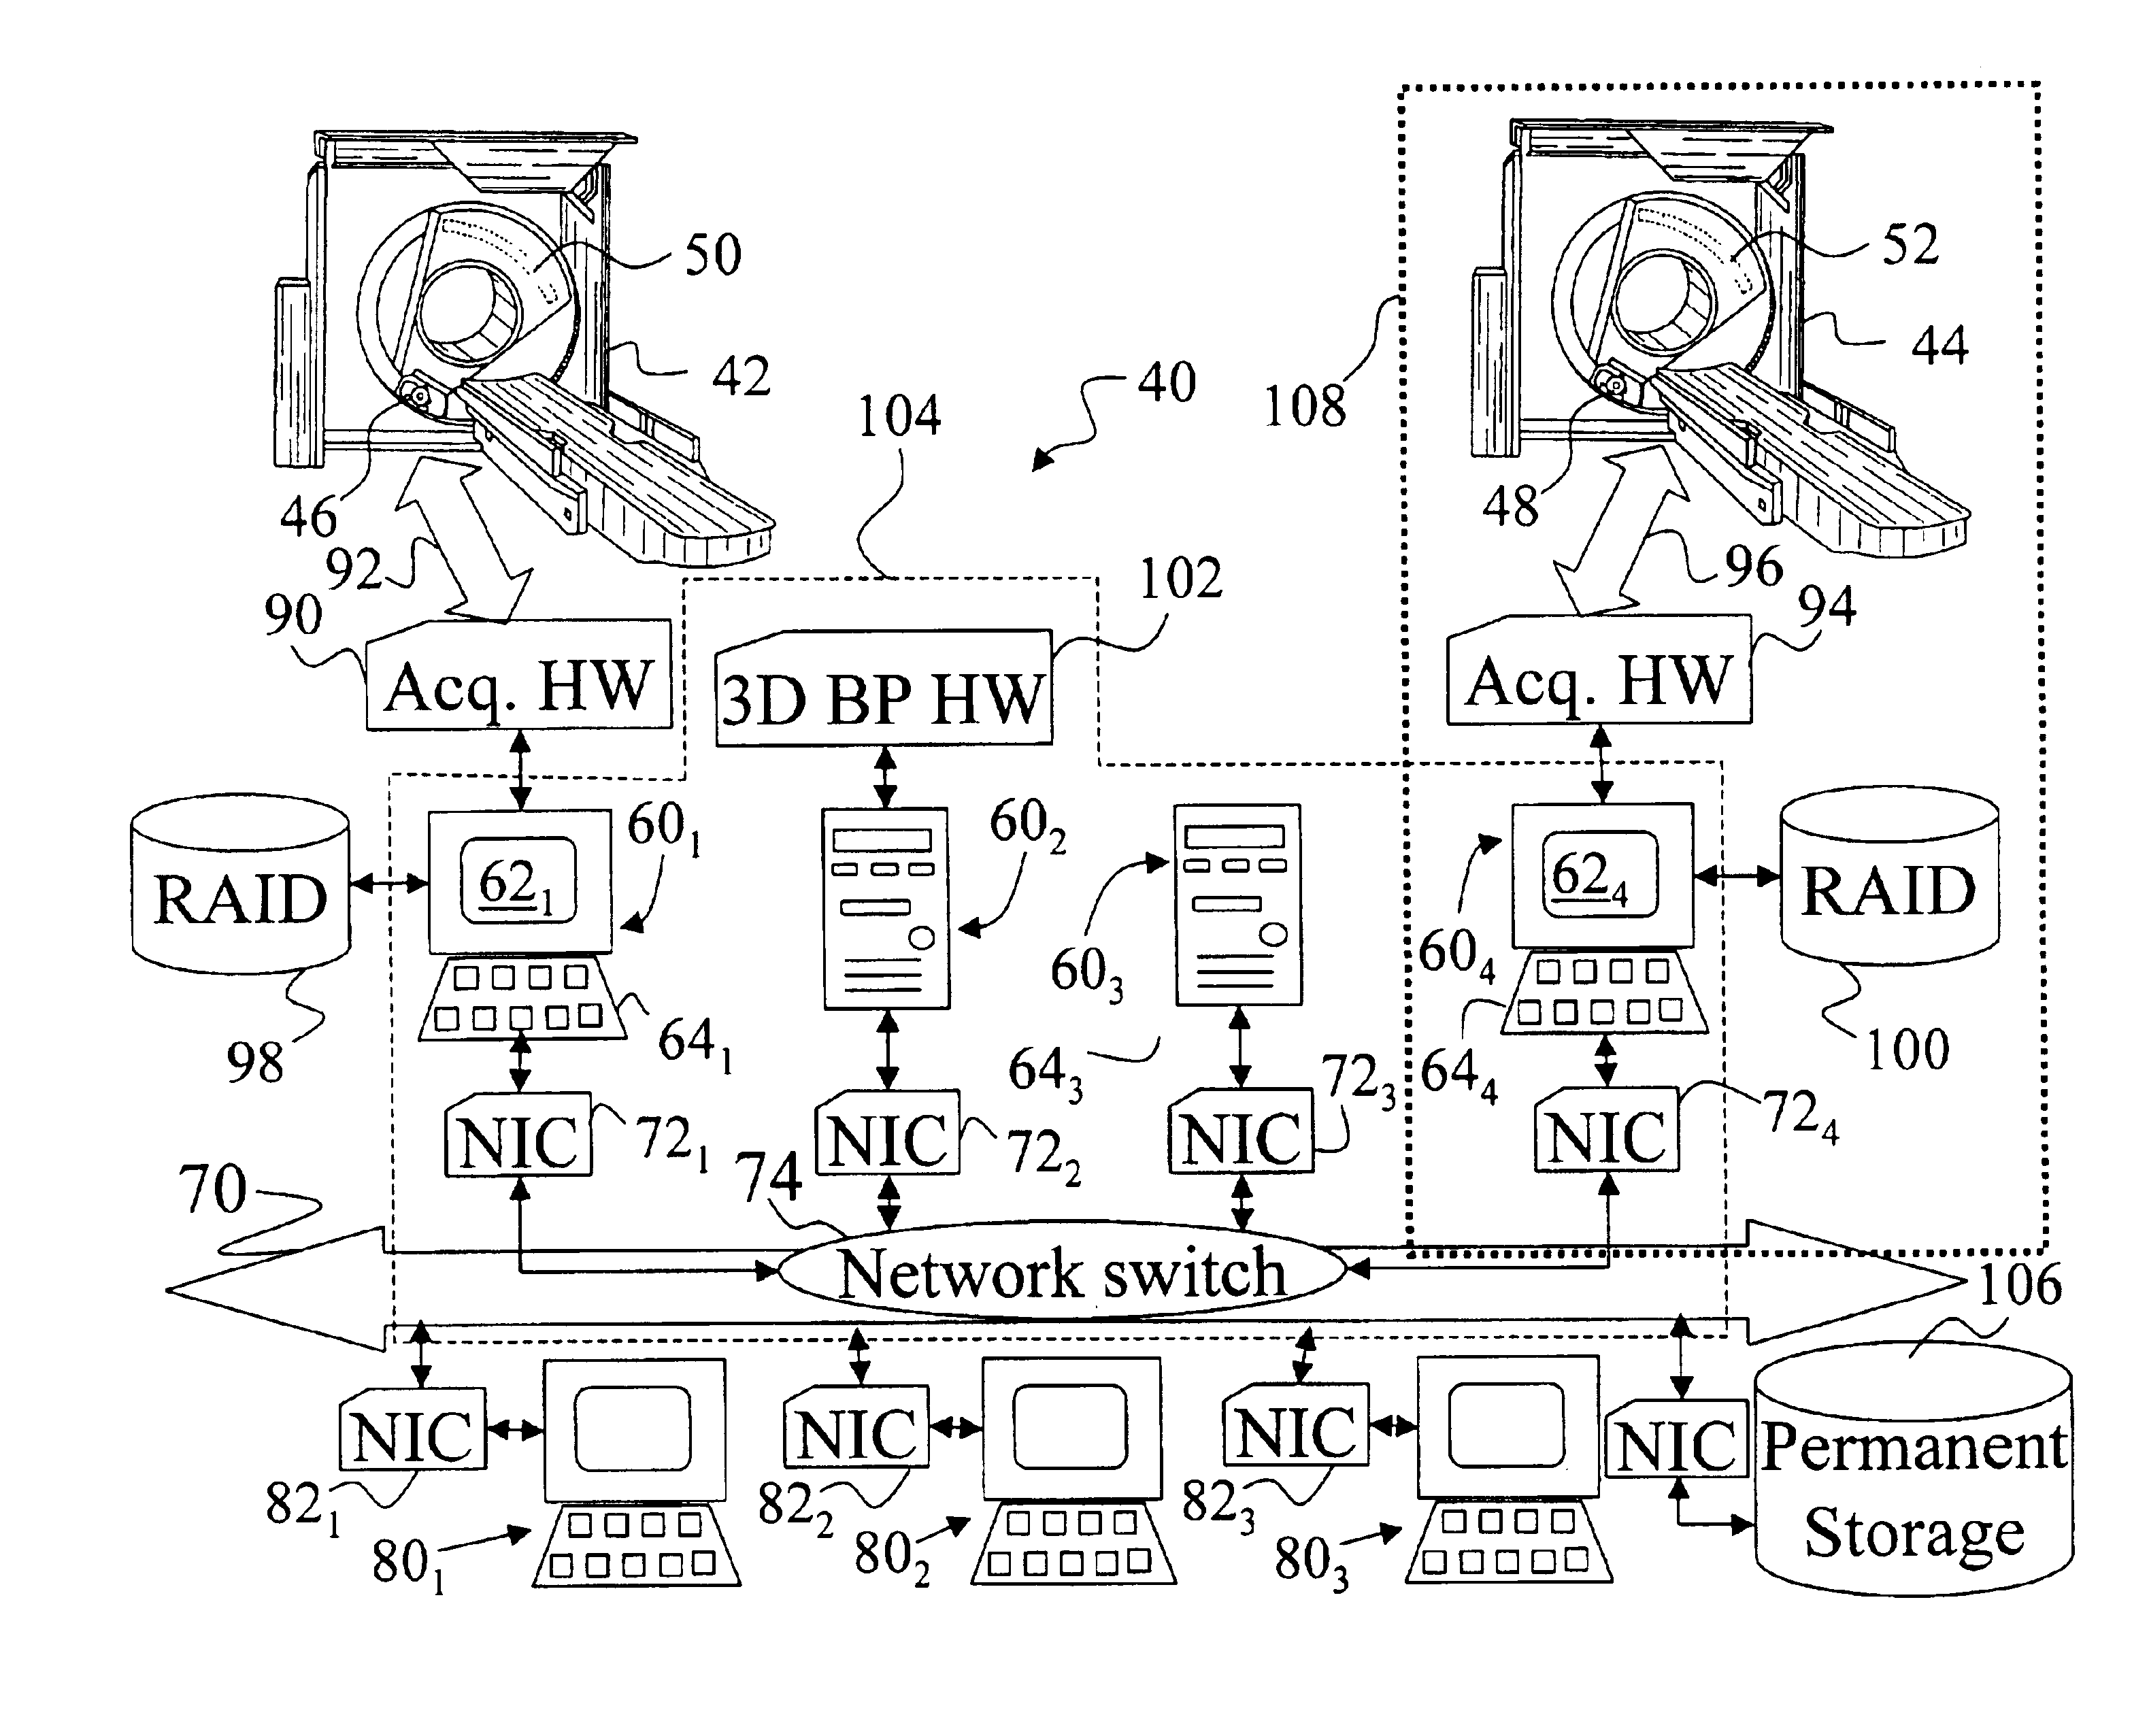 Method and apparatus for computed tomography imaging